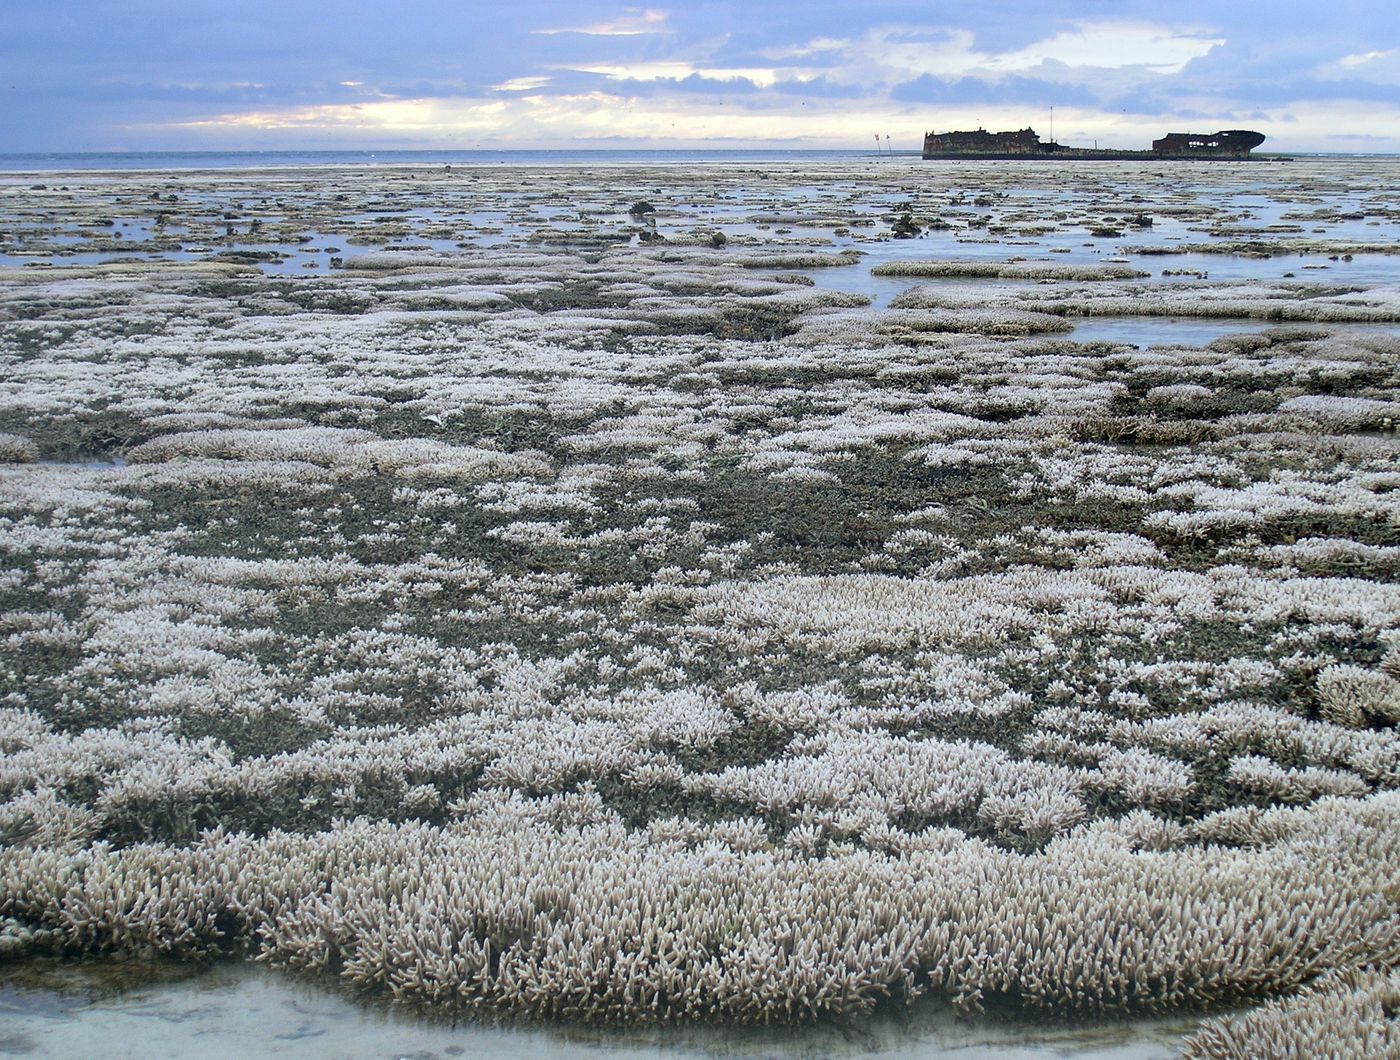 A major coral bleaching event on the Great Barrier Reef in Australia